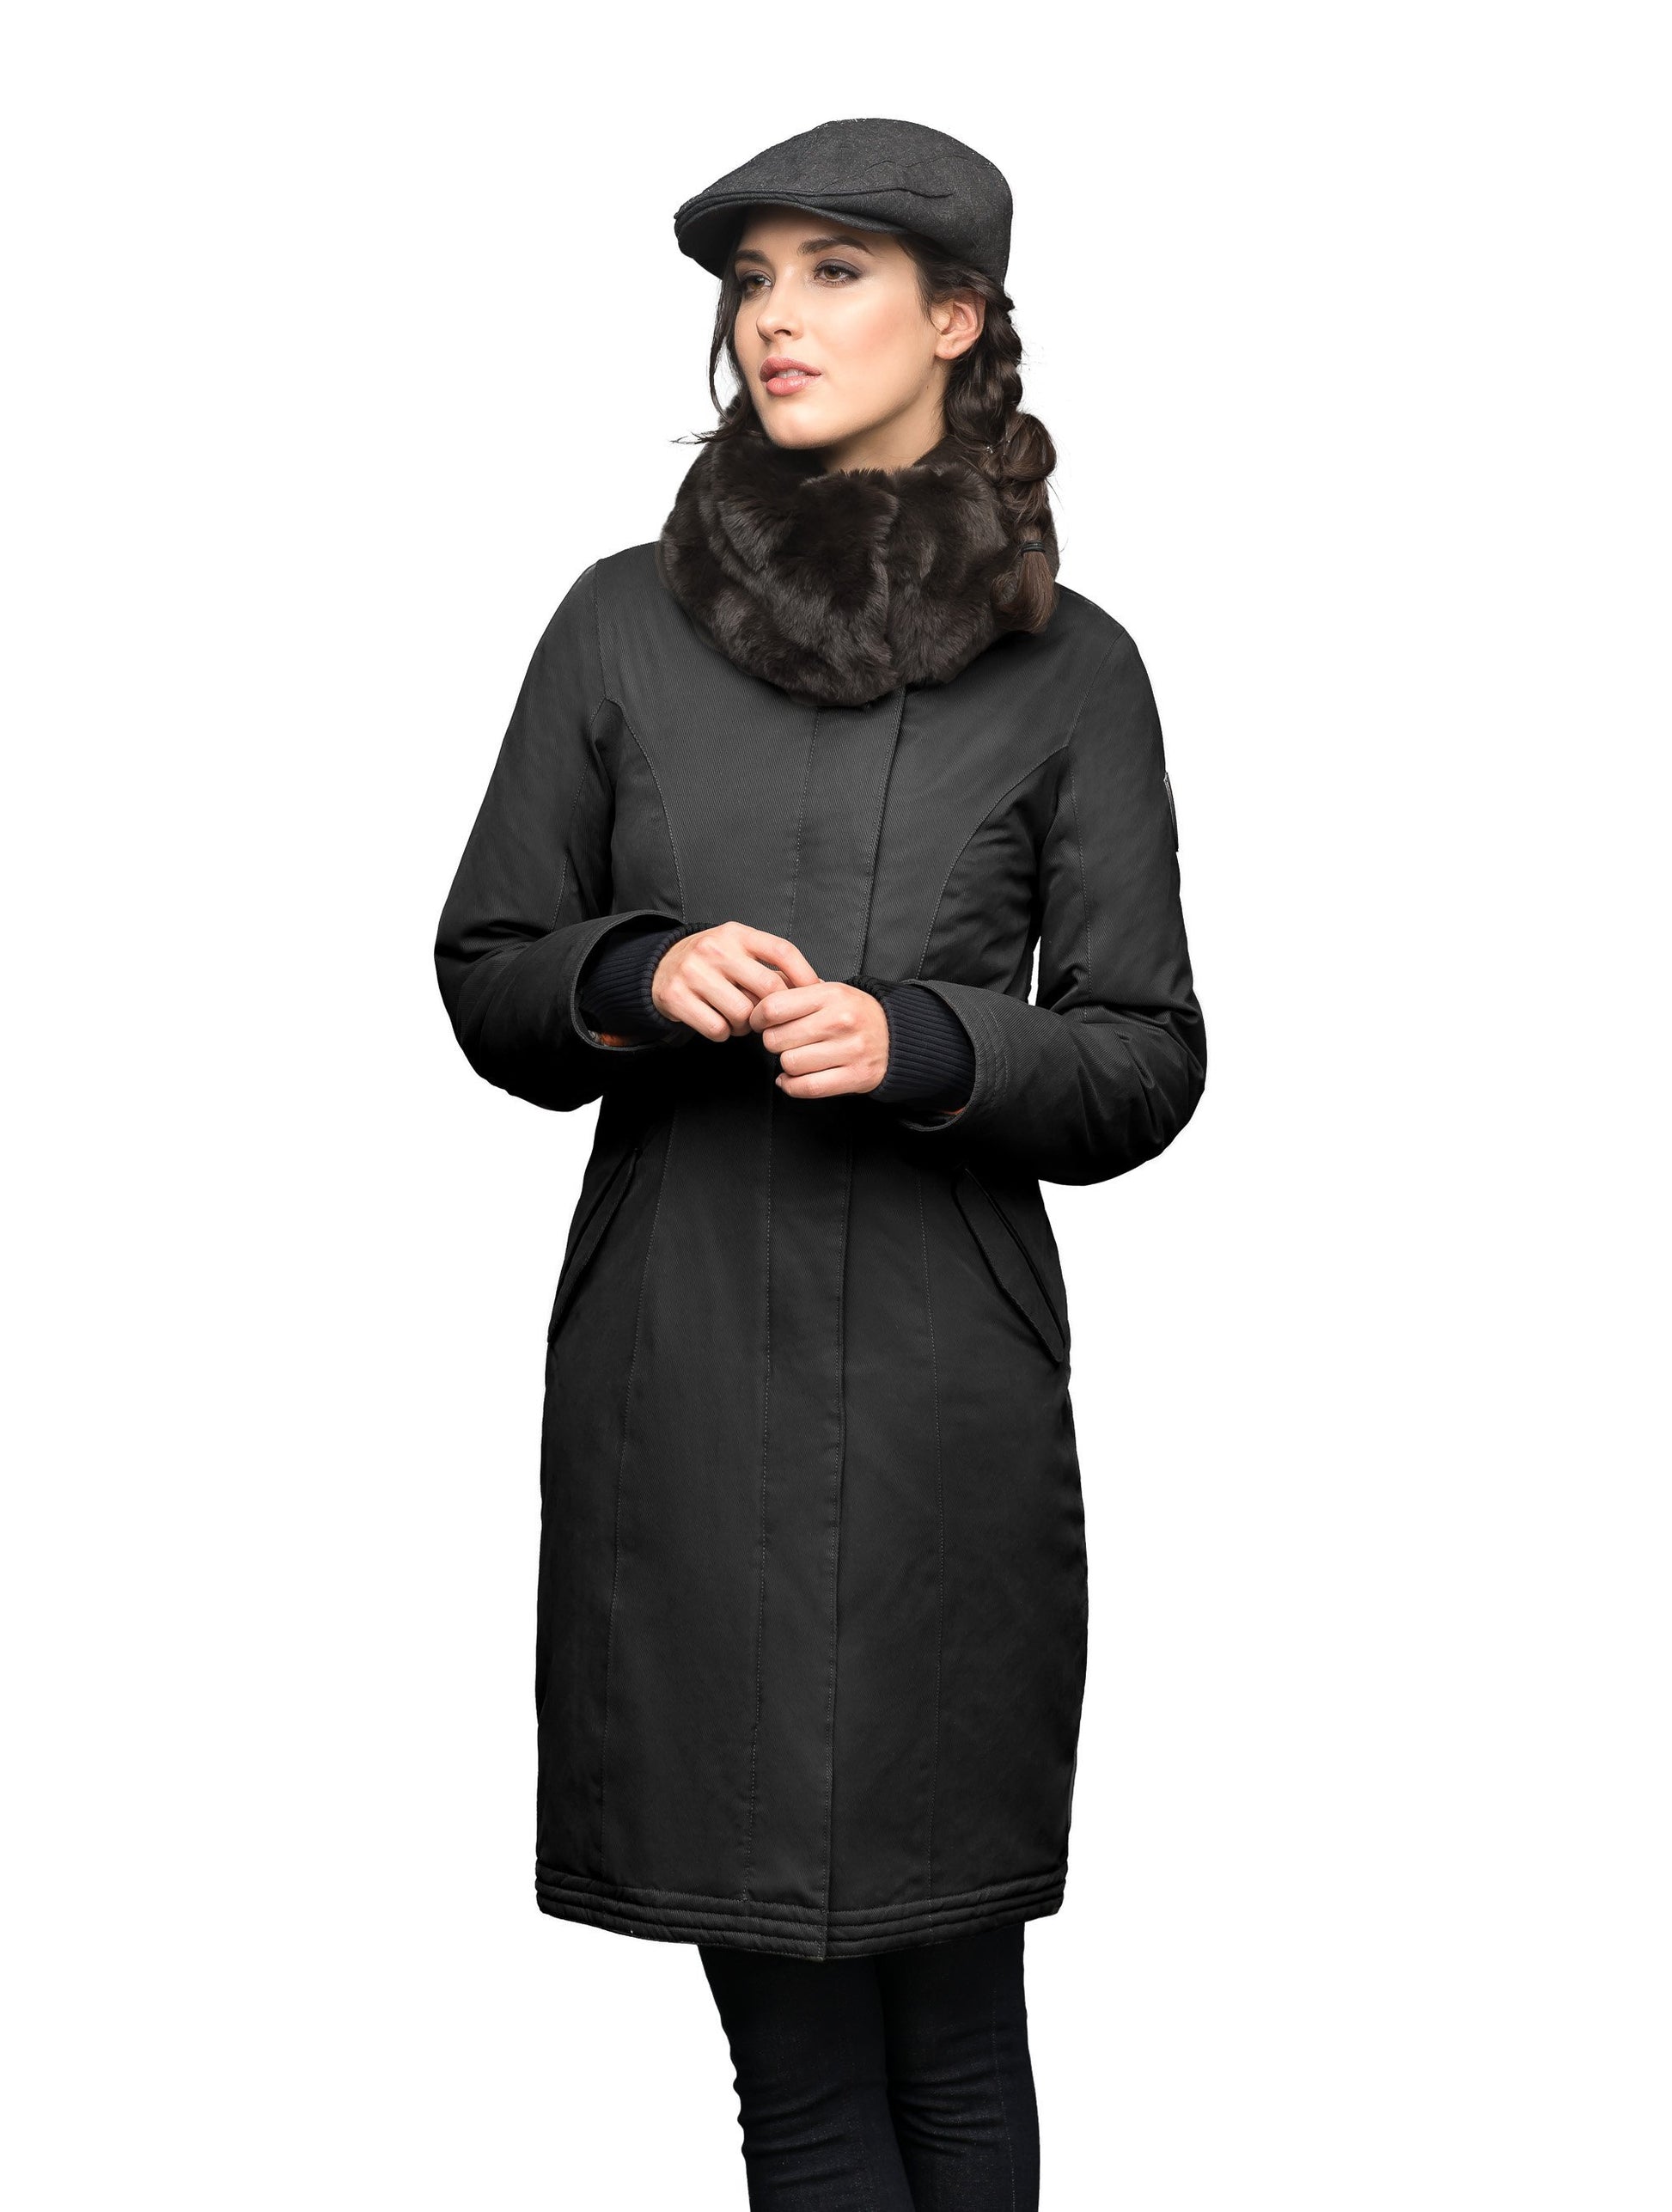 Women's down filled overcoat with fur trim in Black